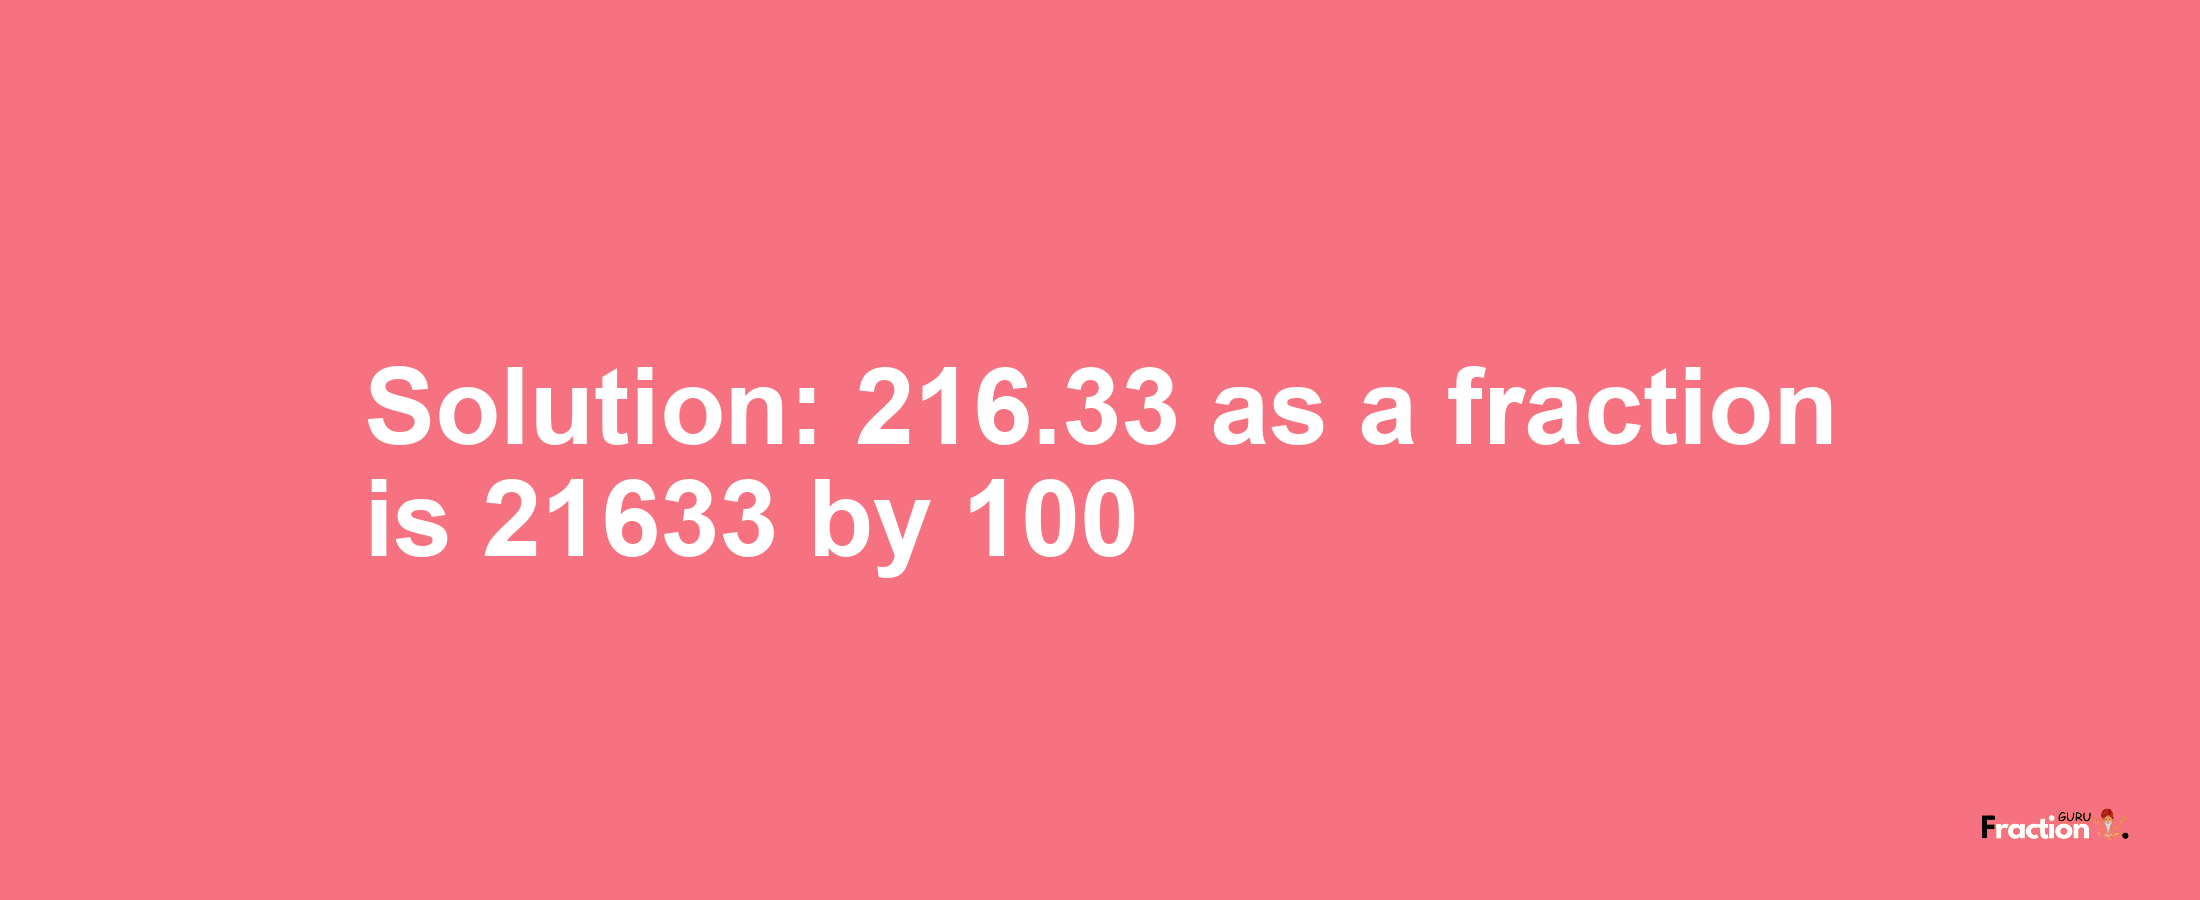 Solution:216.33 as a fraction is 21633/100